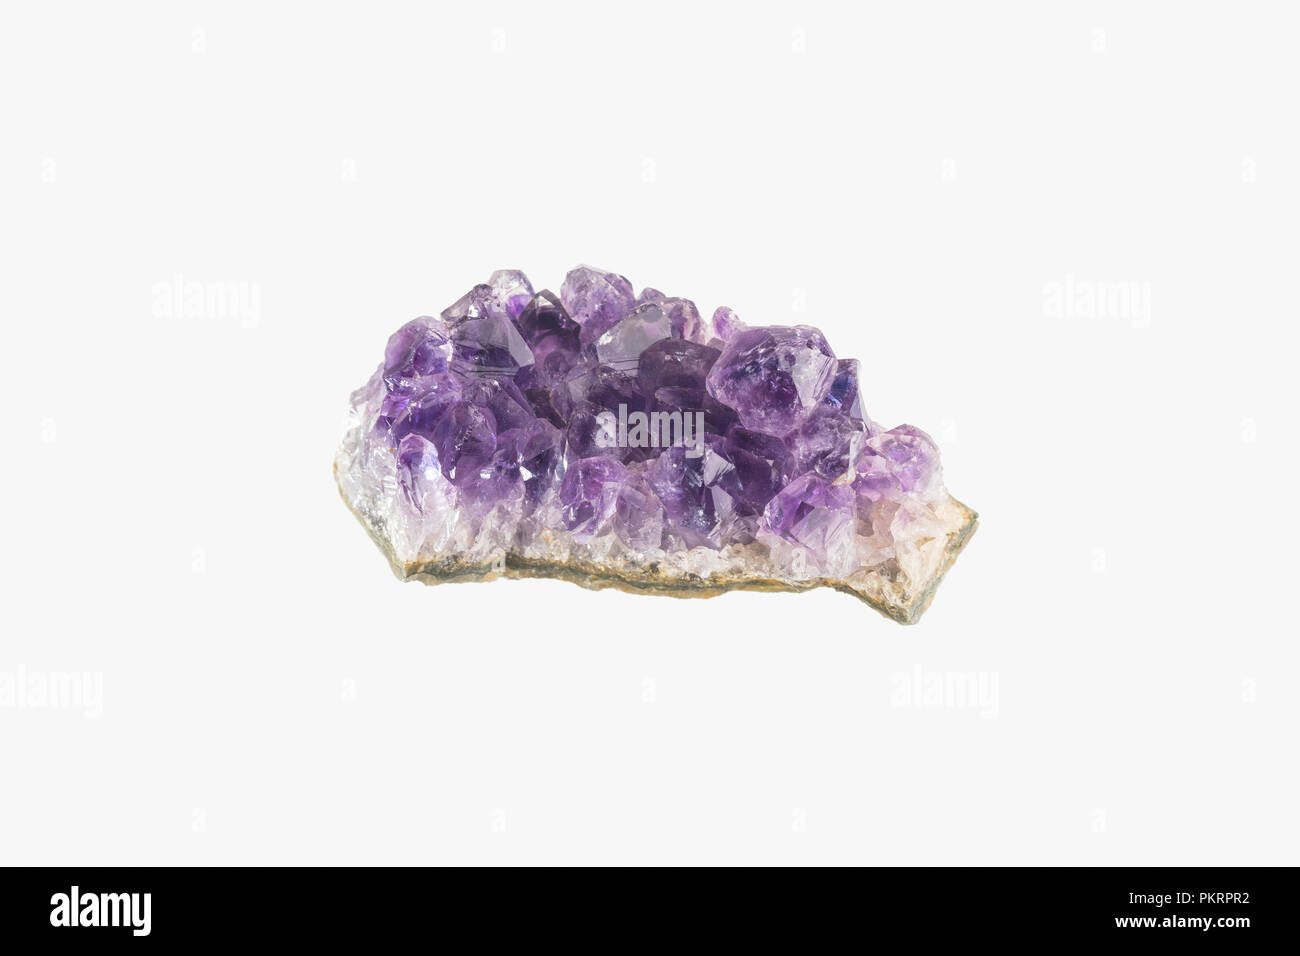 Amethyst druse isolated. Purple rough amethyst crystals. Stock Photo